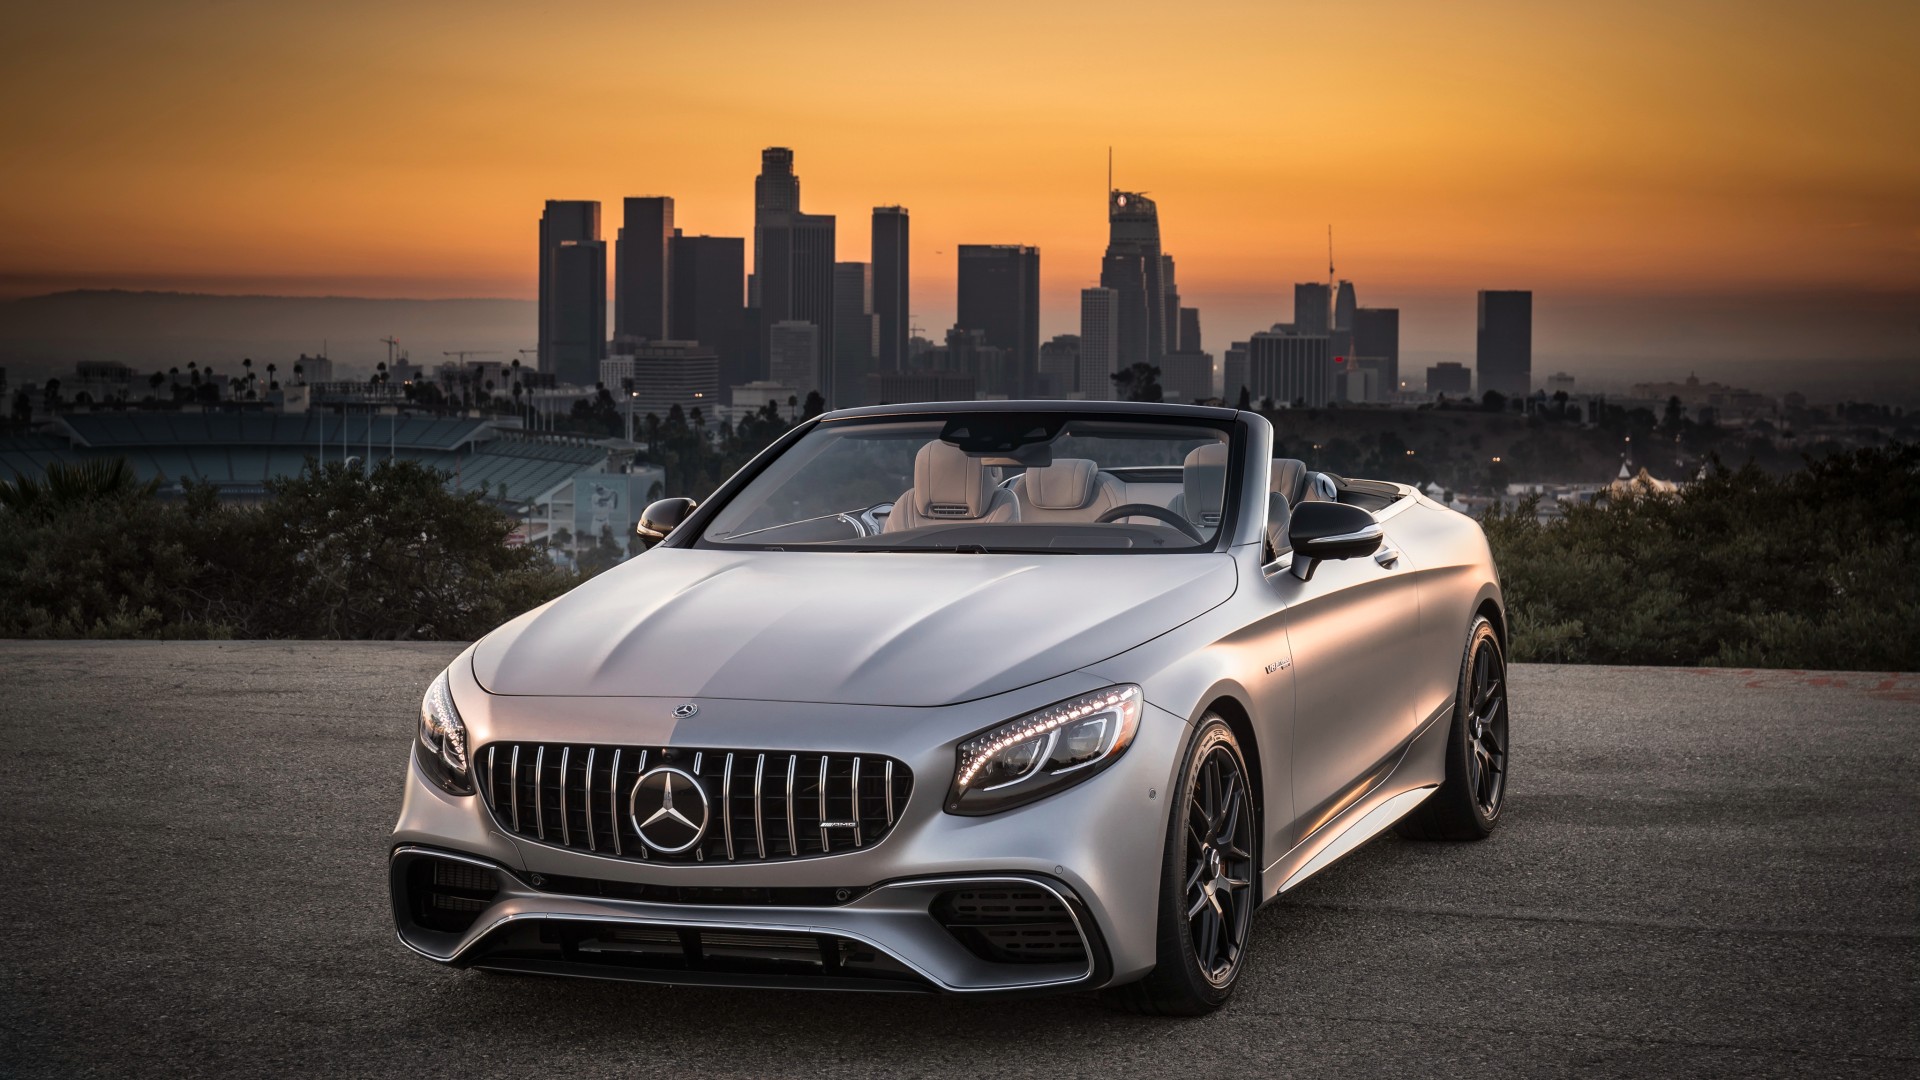 Don't miss out on the car for you. 2018 Mercedes AMG S63 4MATIC Cabriolet 4K Wallpaper | HD